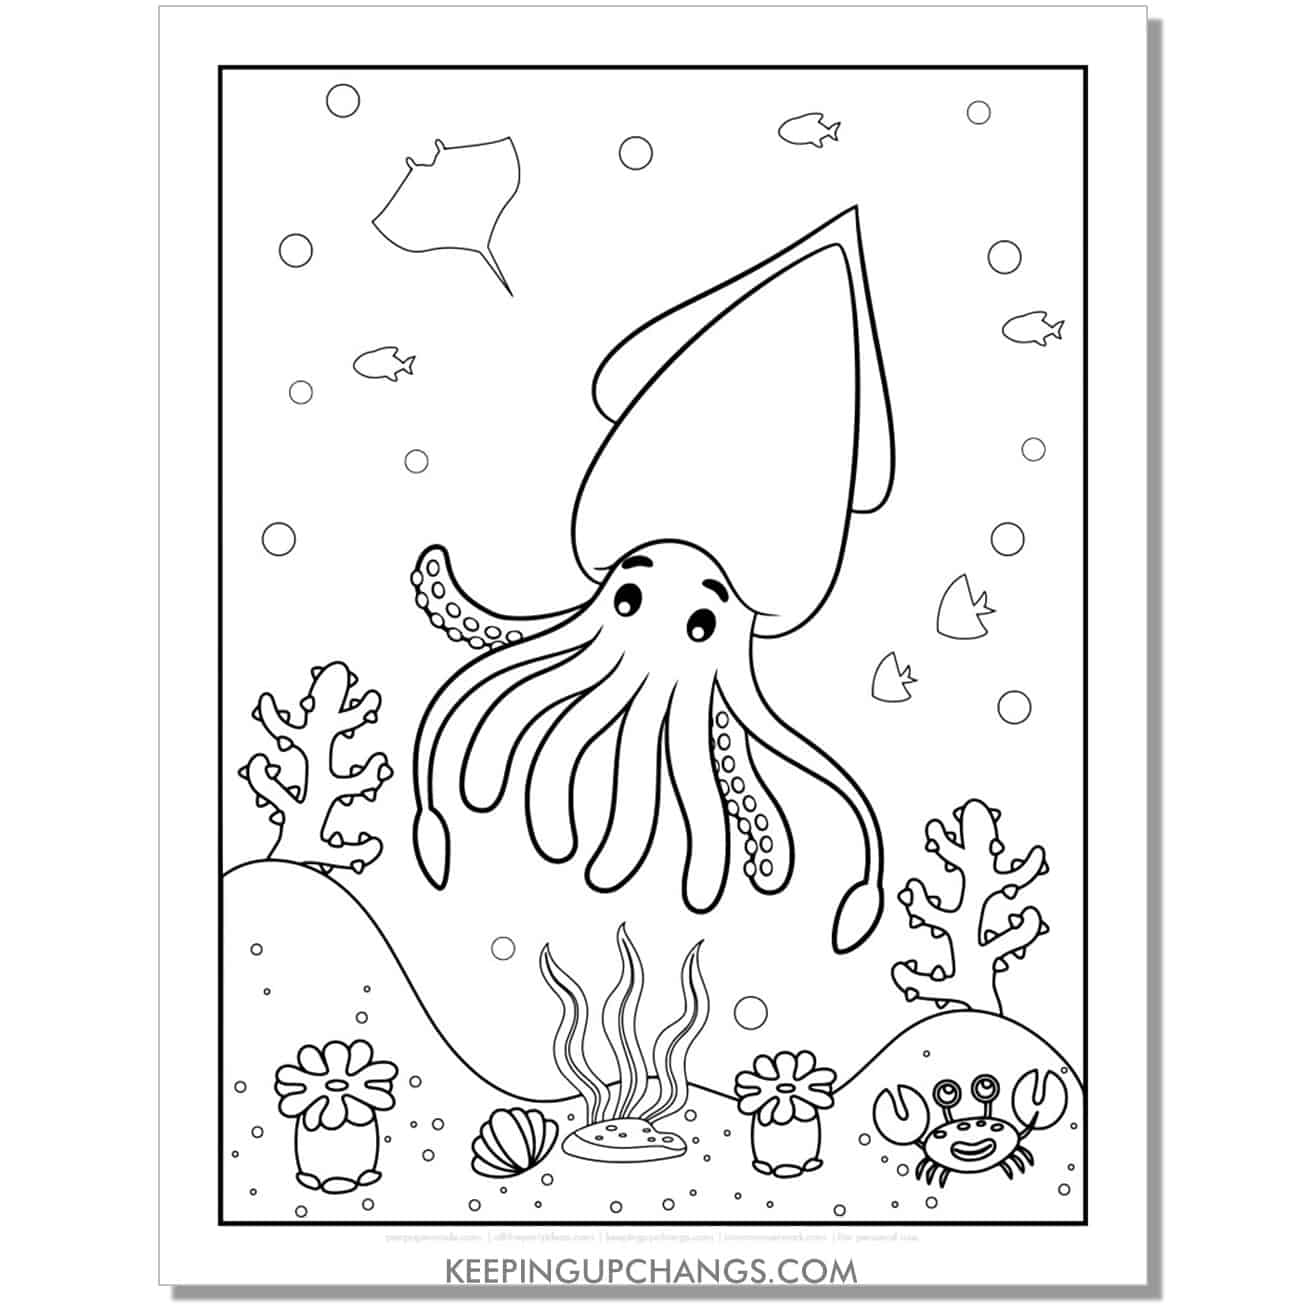 free cute squid in ocean coloring page, sheet for kids.